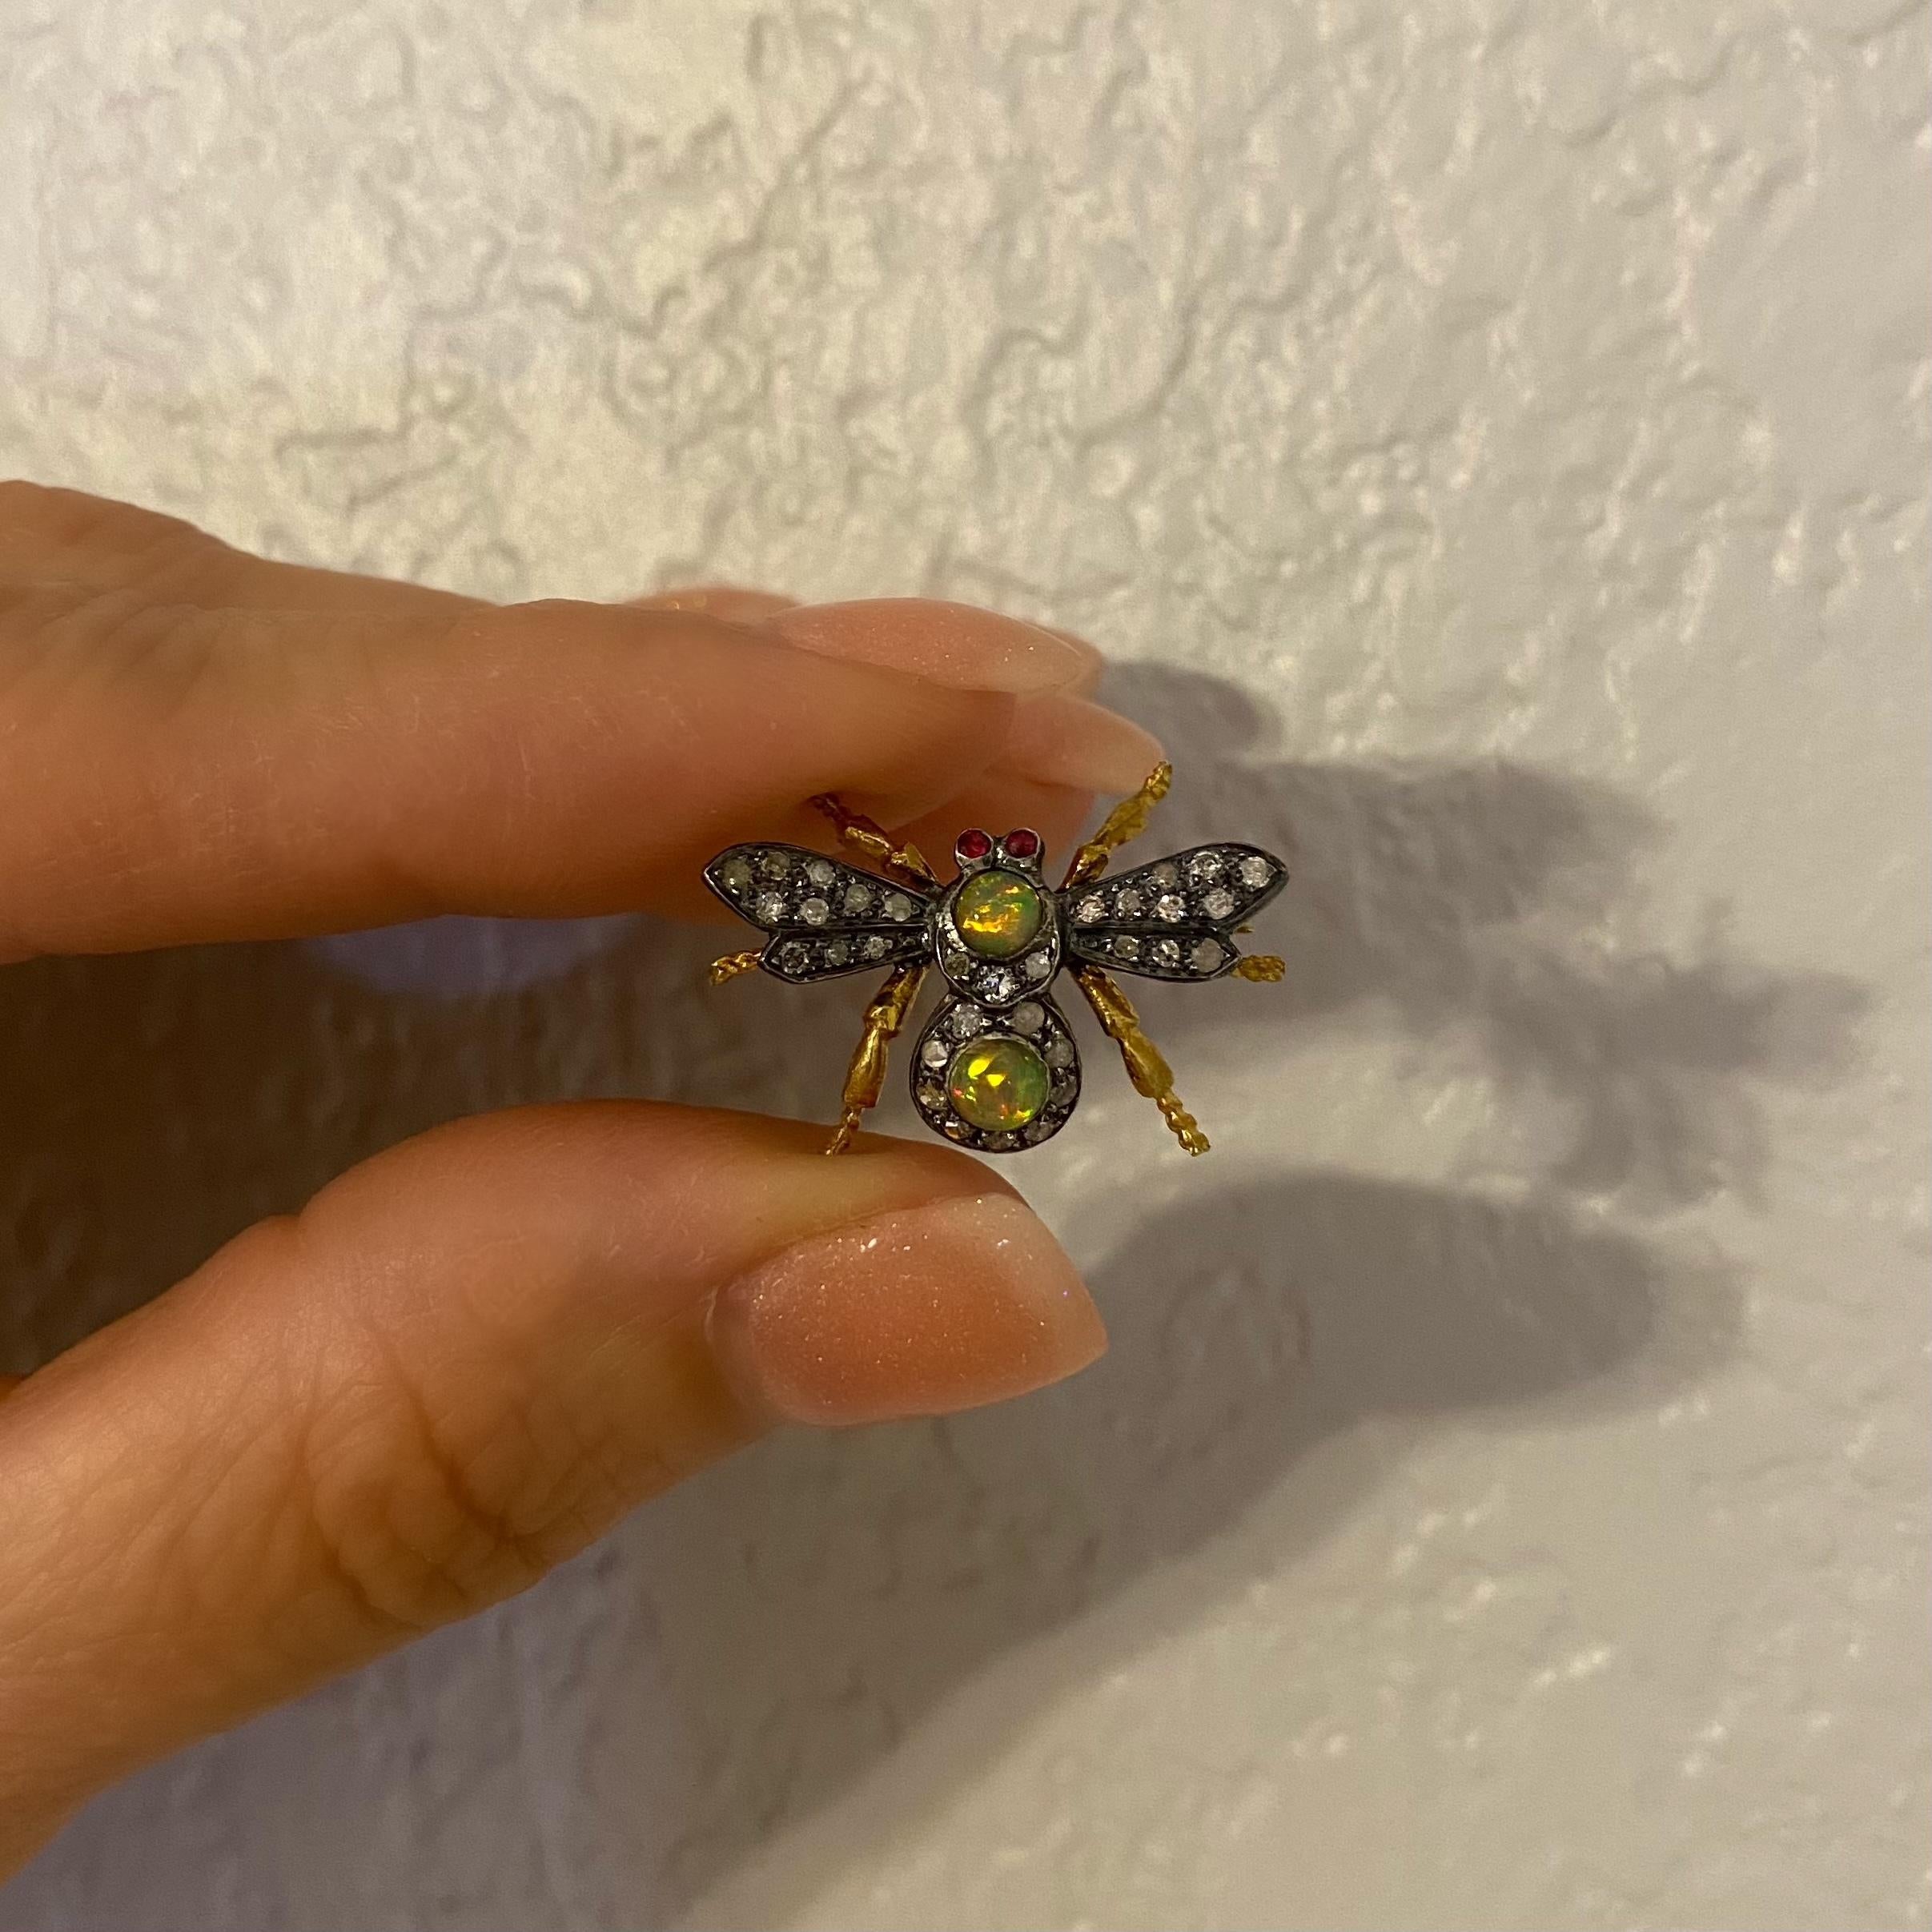 Beautiful Finely detailed Bee Fly Wasp Brooch. Hand set with 32 round Brilliant cut Diamonds, approx. 0.30tcw; 2 round Opals, approx. 0.25tcw and 2 ruby eyes, approx. 0.03tcw. Approx. size: 1 inch tall. Hand crafted in 18 Karat Yellow Gold and